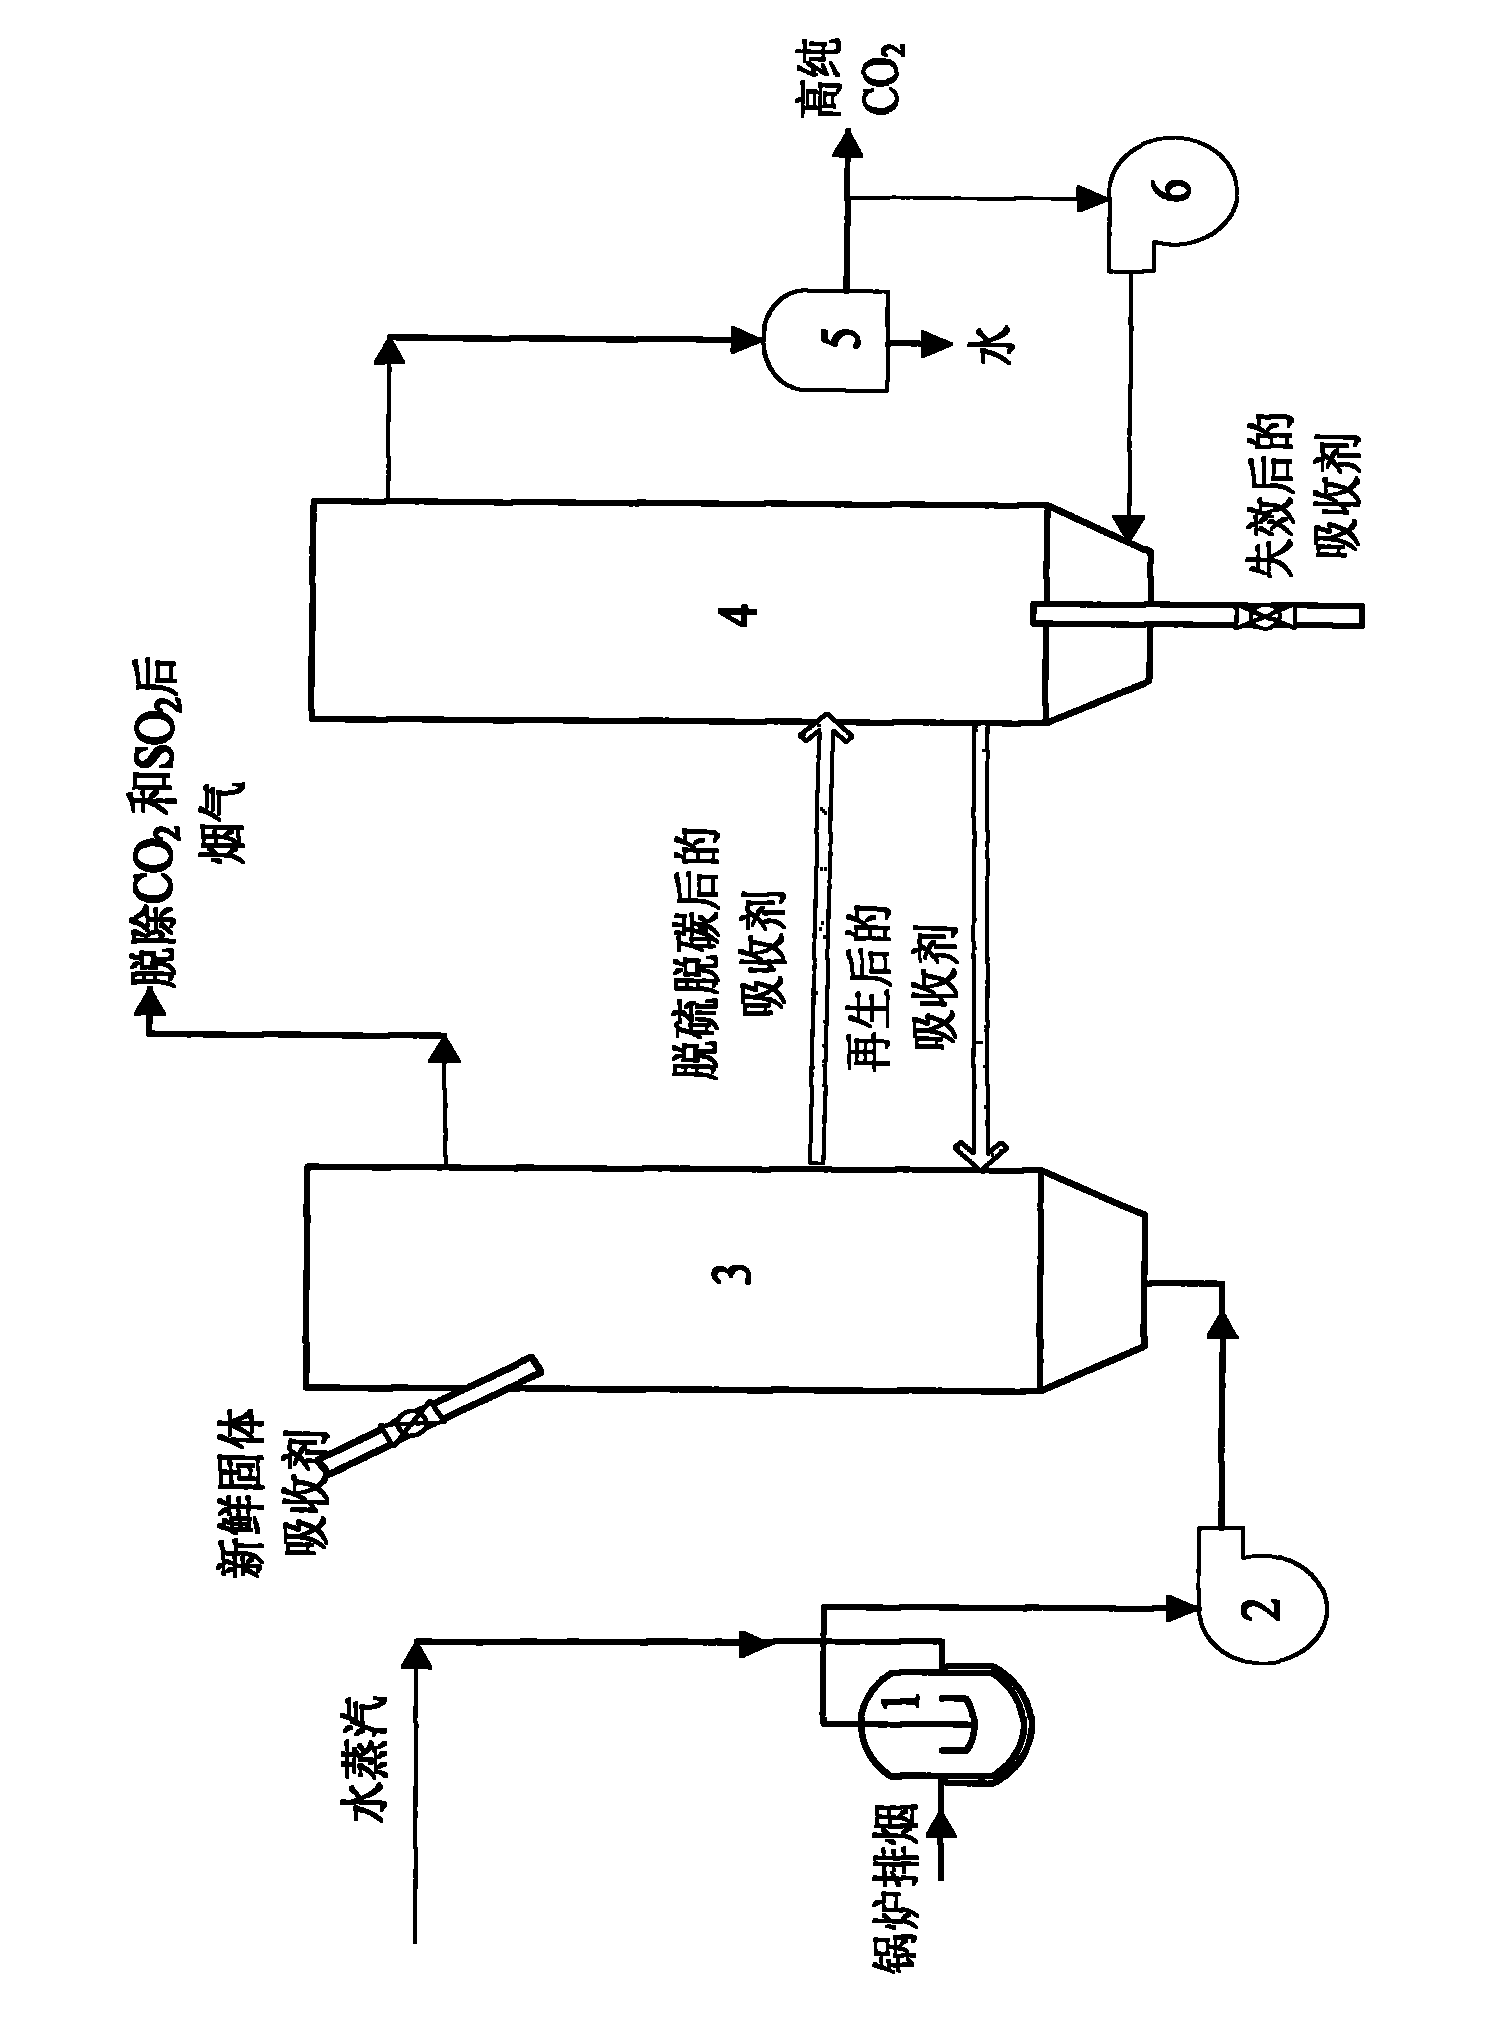 Method for jointly removing carbon dioxide and sulfur dioxide from smoke